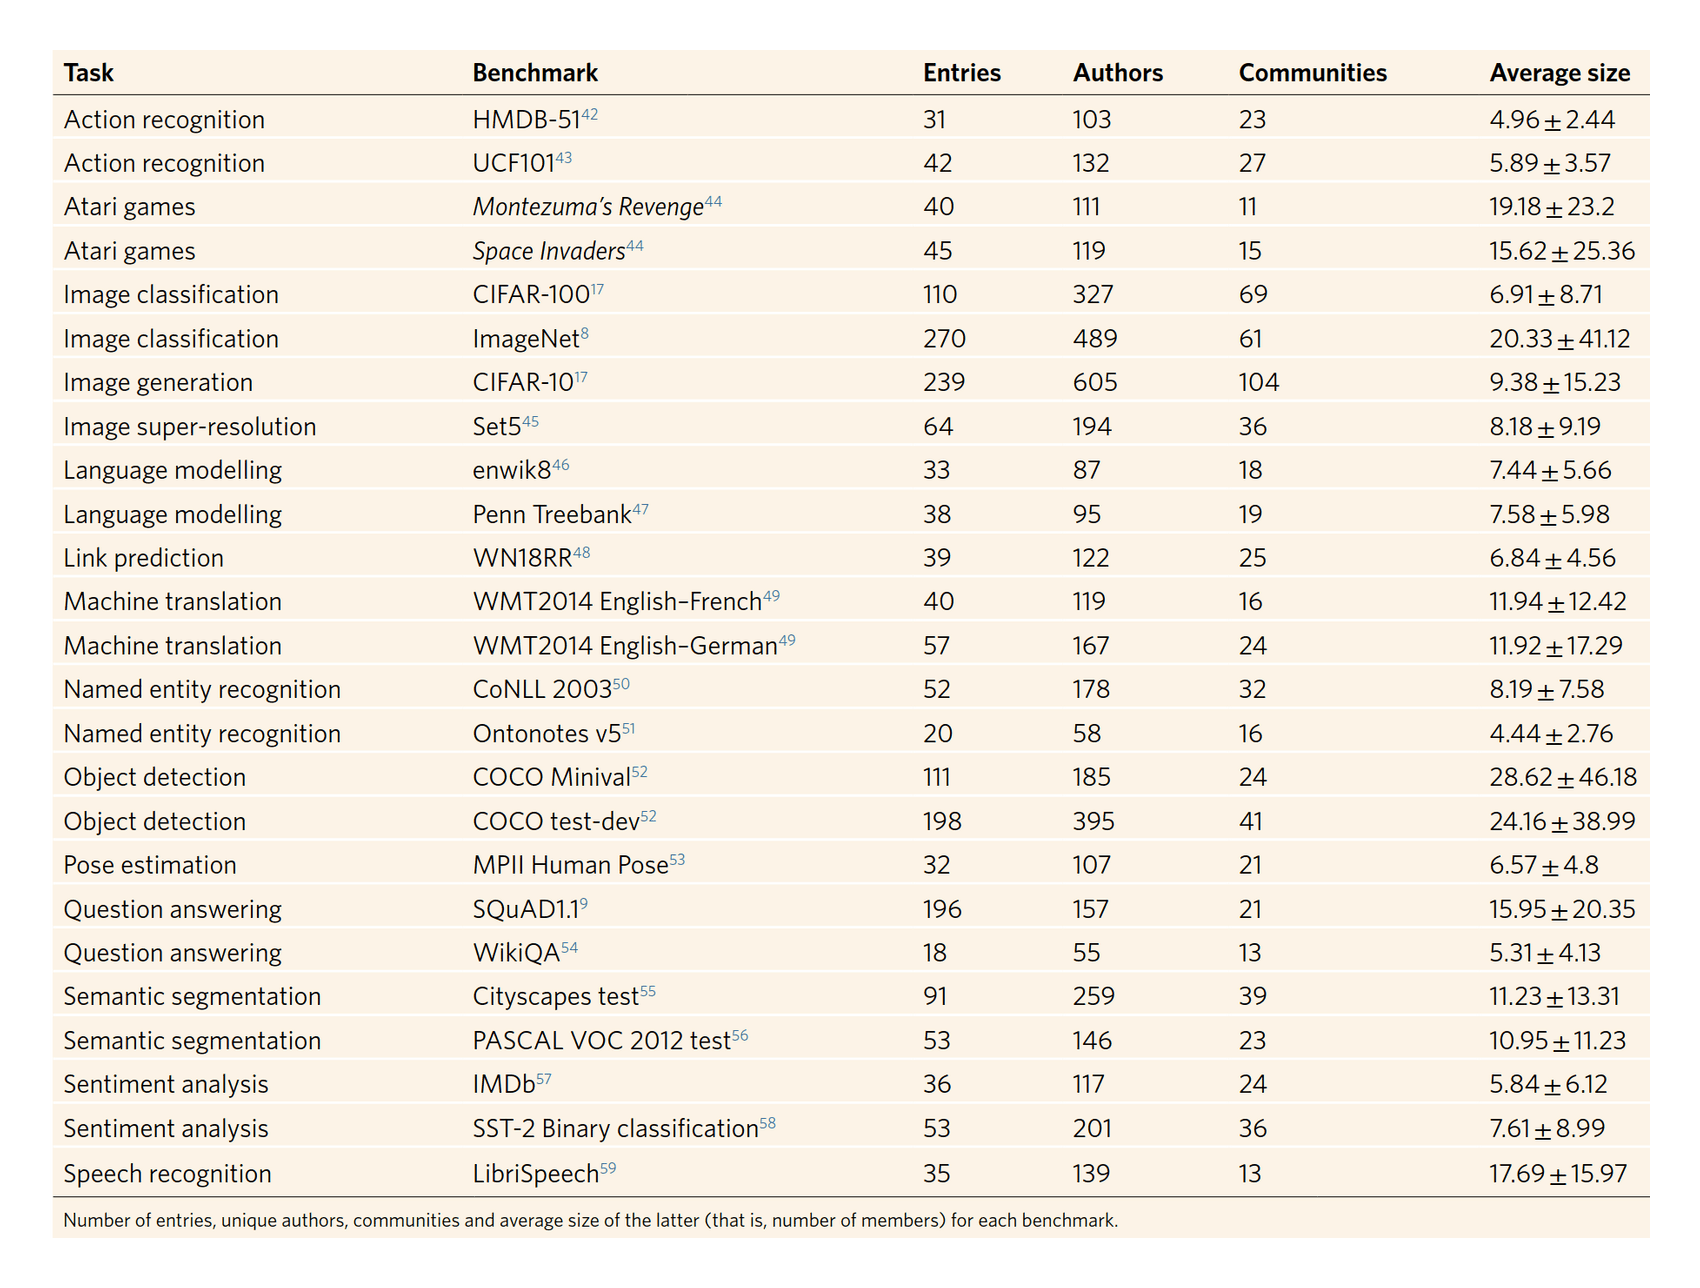 Table 1: list of AI benchmarks used in the analysis by task